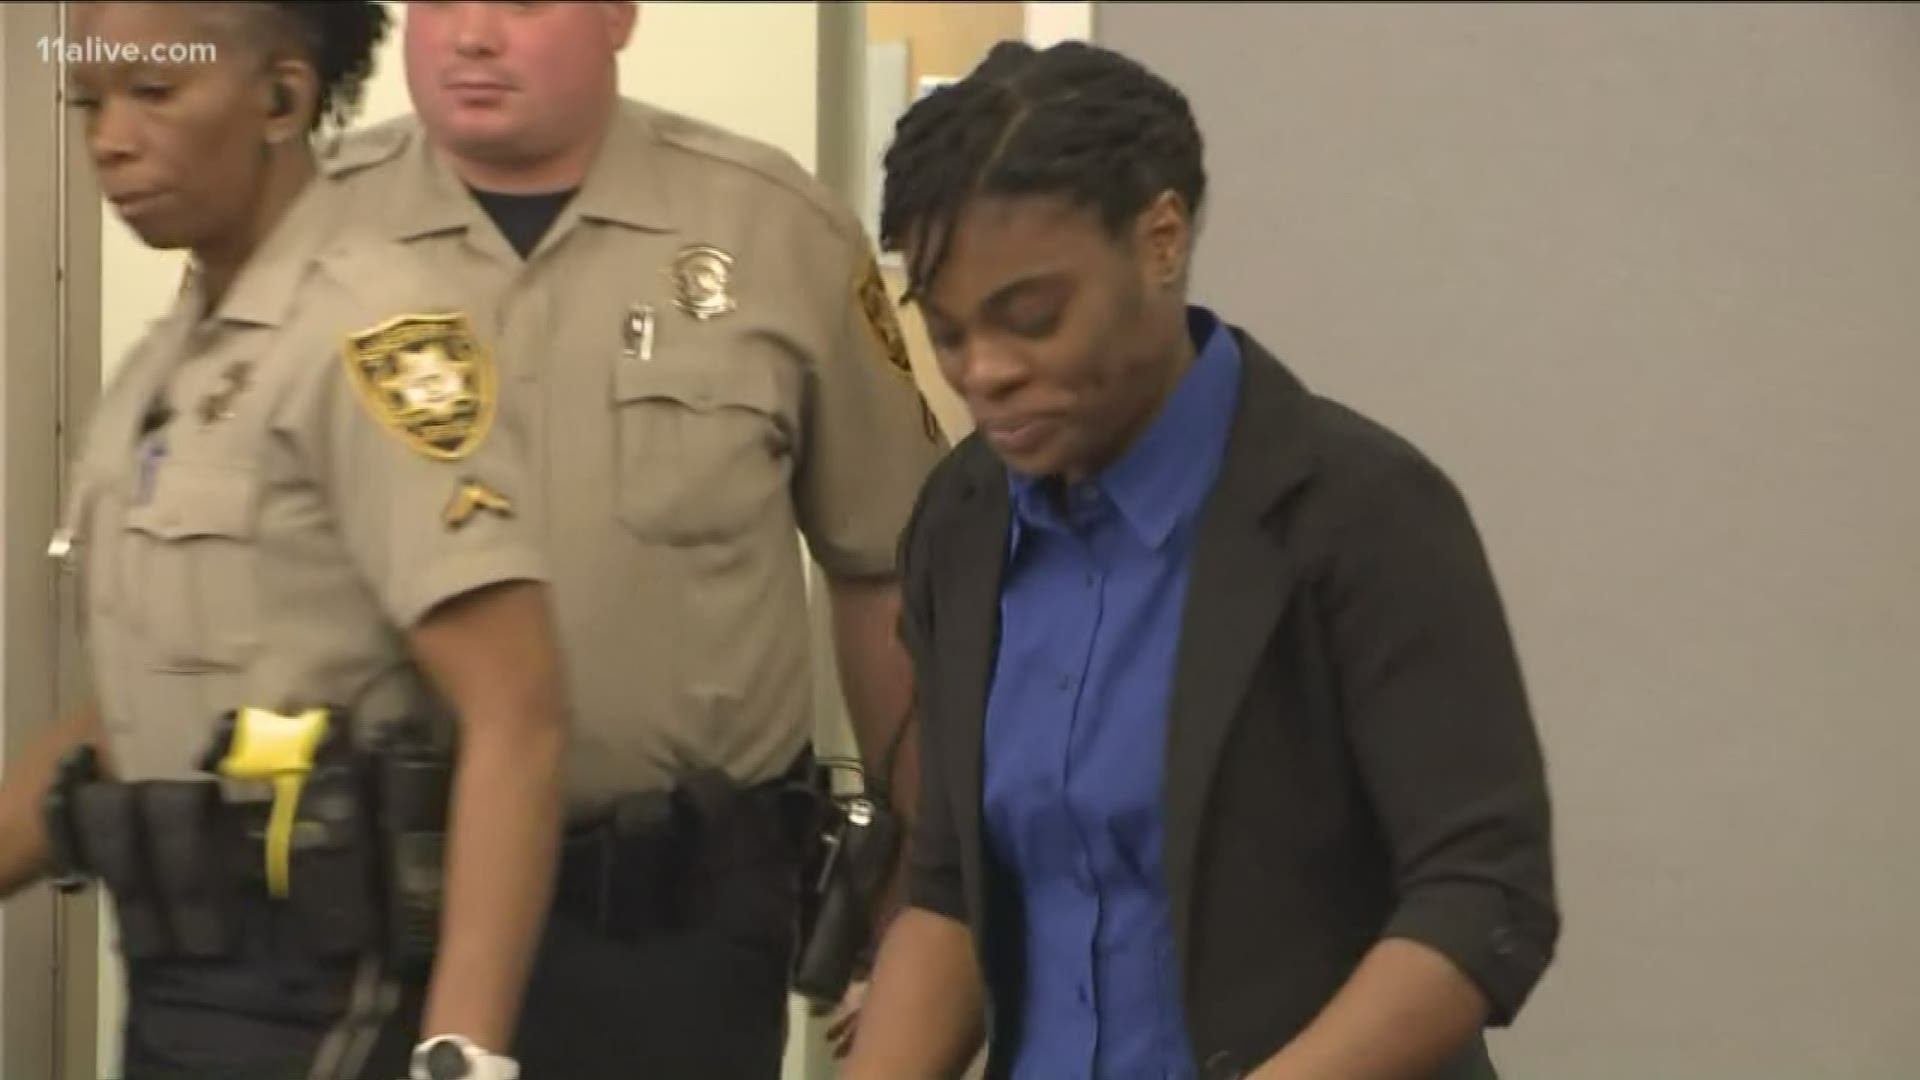 Tiffany Moss was sentenced to death for starving her 10-year-old stepdaughter and burning her body in a trashcan.